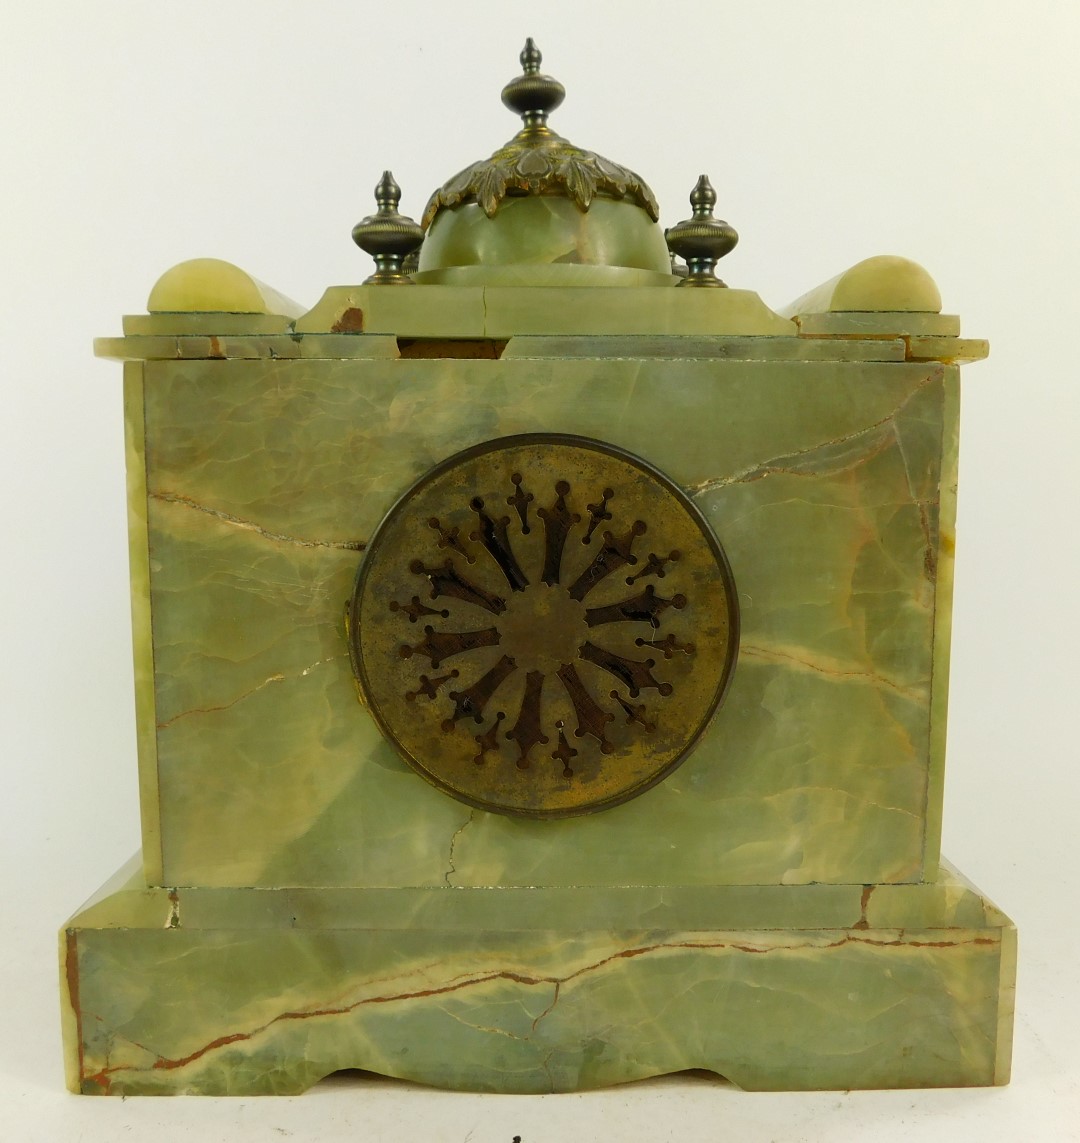 A 19thC green onyx and gilt metal mounted mantel clock, with a Arabic numeral dial, brass chapter ri - Image 3 of 4